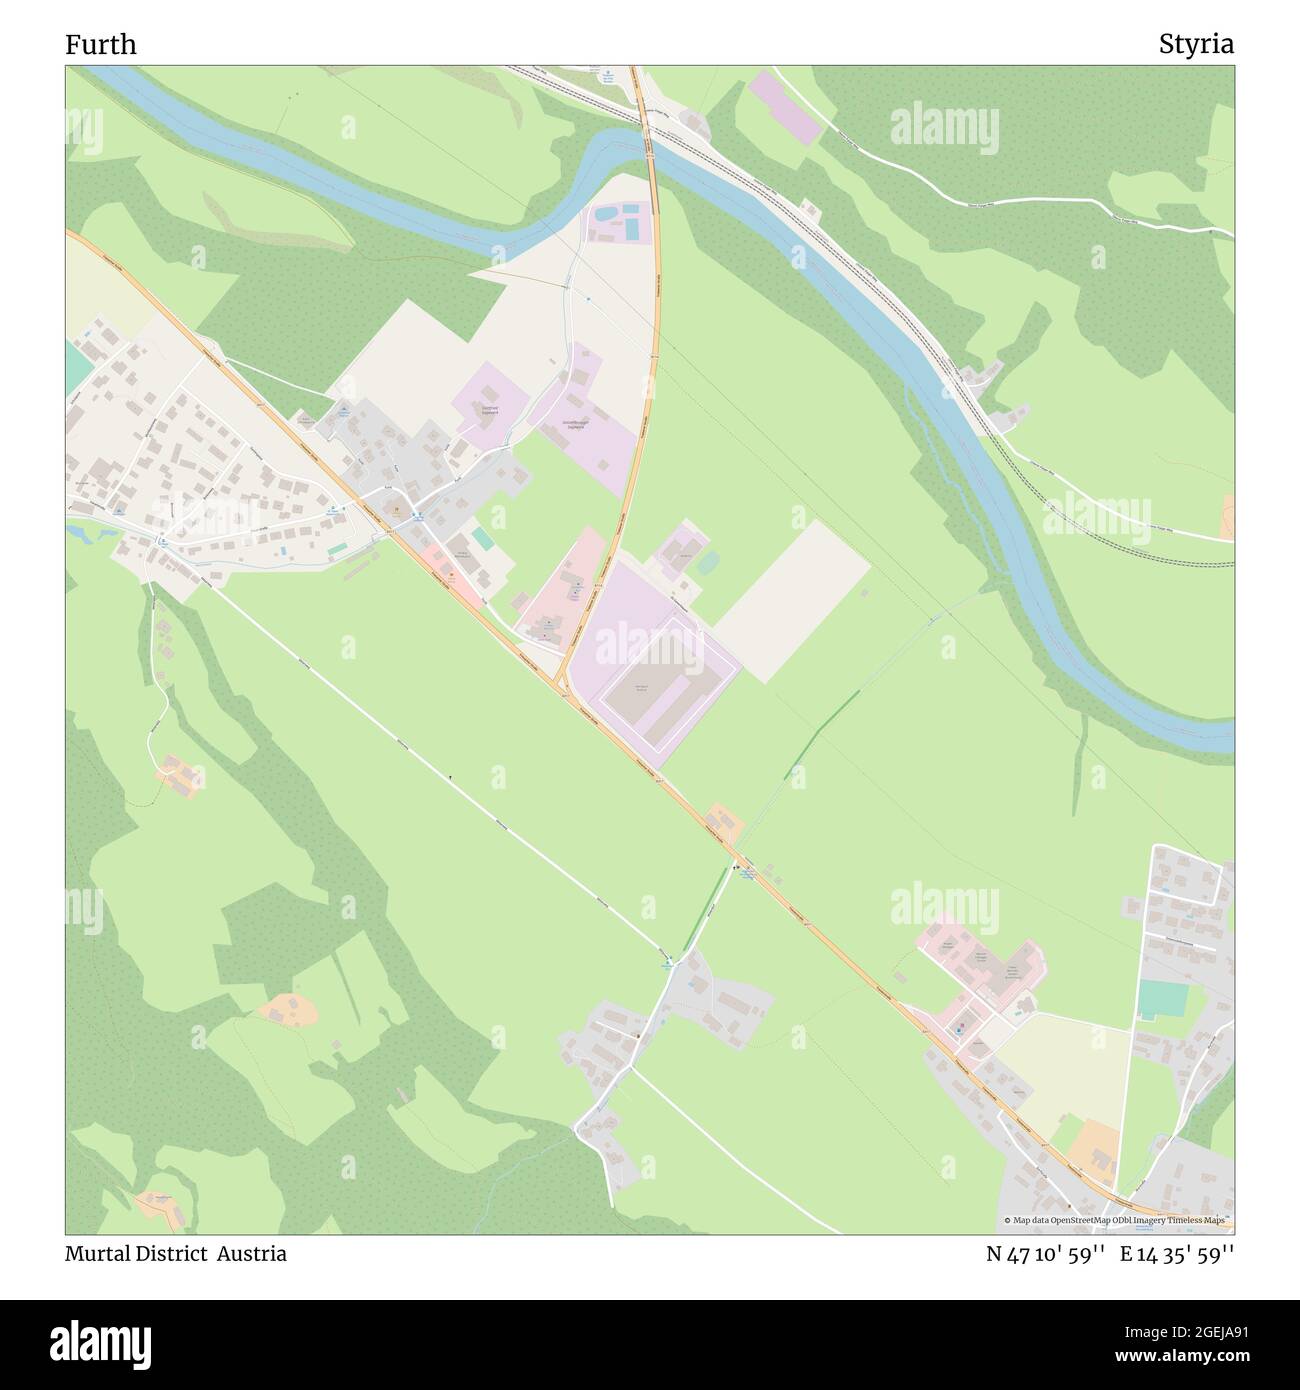 Furth, Murtal District, Austria, Styria, N 47 10' 59'', E 14 35' 59'', map, Timeless Map published in 2021. Travelers, explorers and adventurers like Florence Nightingale, David Livingstone, Ernest Shackleton, Lewis and Clark and Sherlock Holmes relied on maps to plan travels to the world's most remote corners, Timeless Maps is mapping most locations on the globe, showing the achievement of great dreams Stock Photo